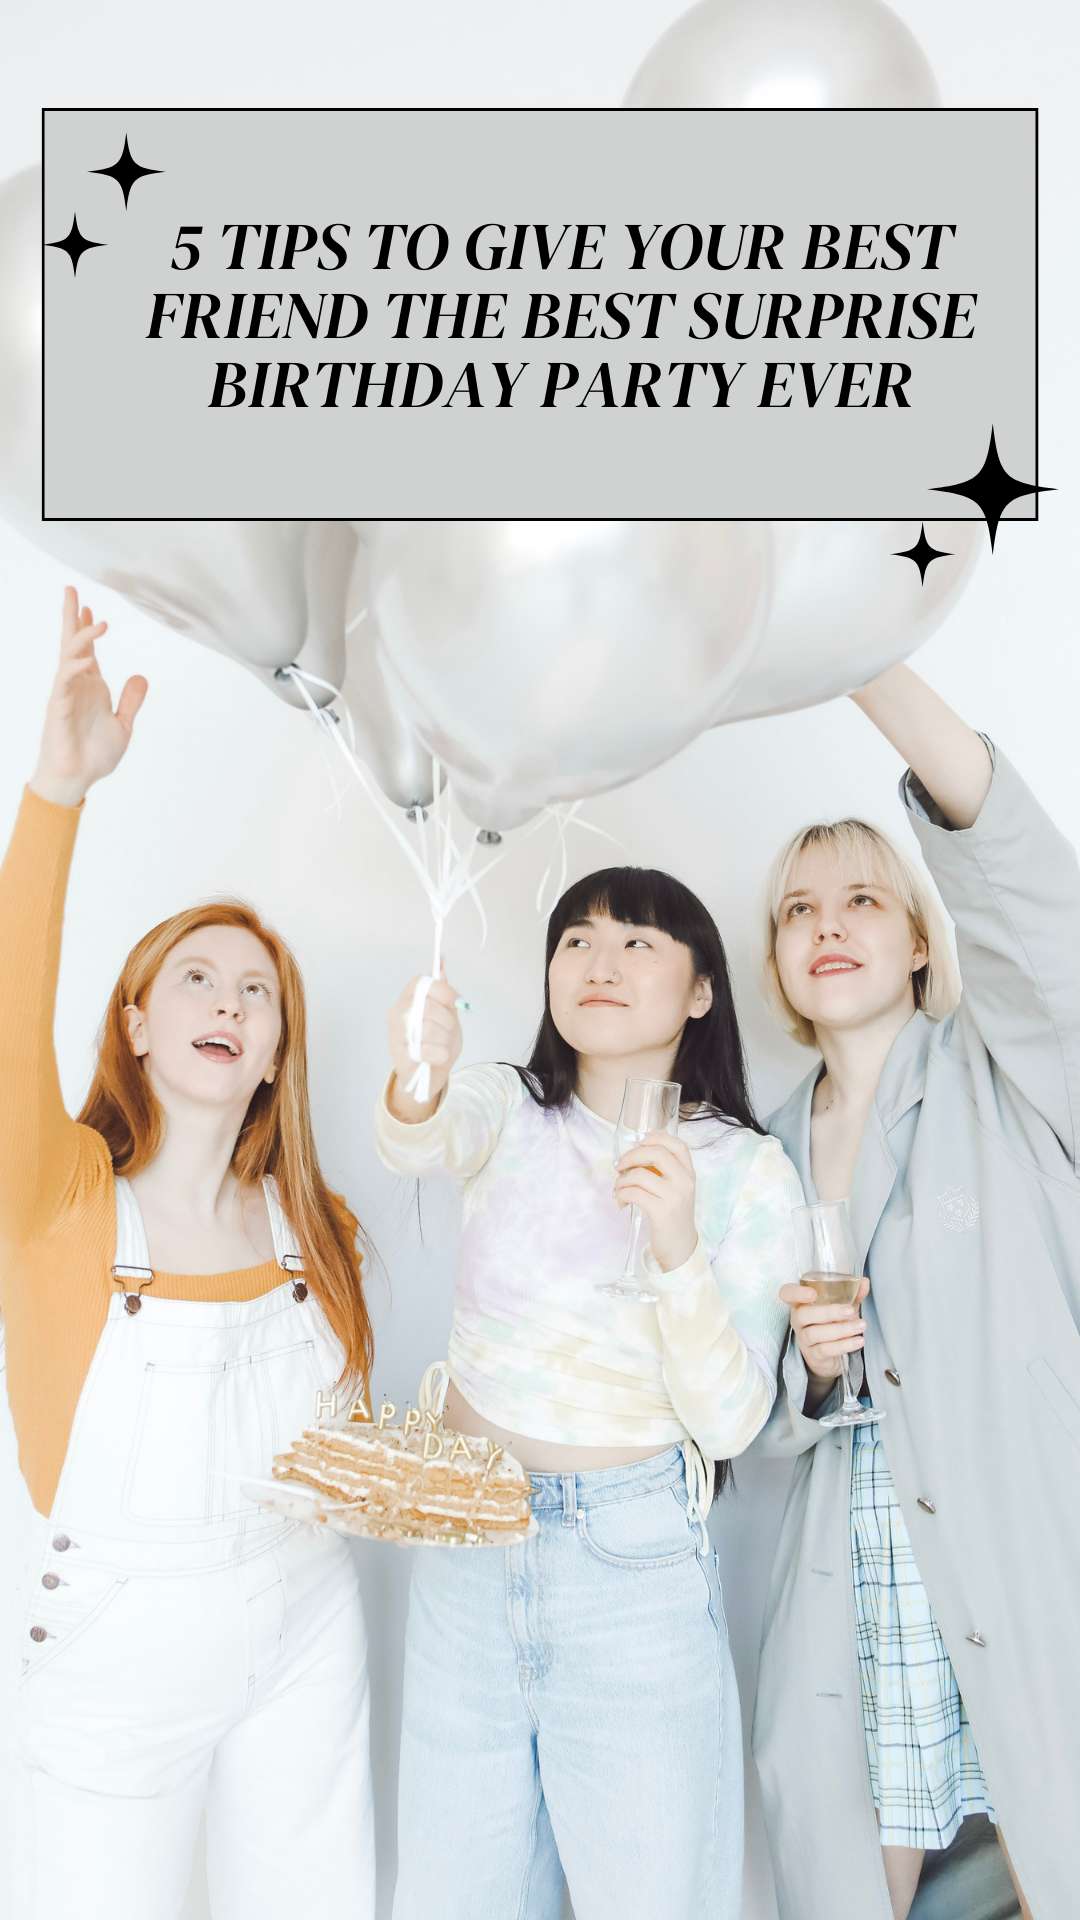 3 women hold silver balloons and look up. The middle woman holds her Birthday cake in surprise. This article covers how to give your best friend the best surprise Birthday party ever.